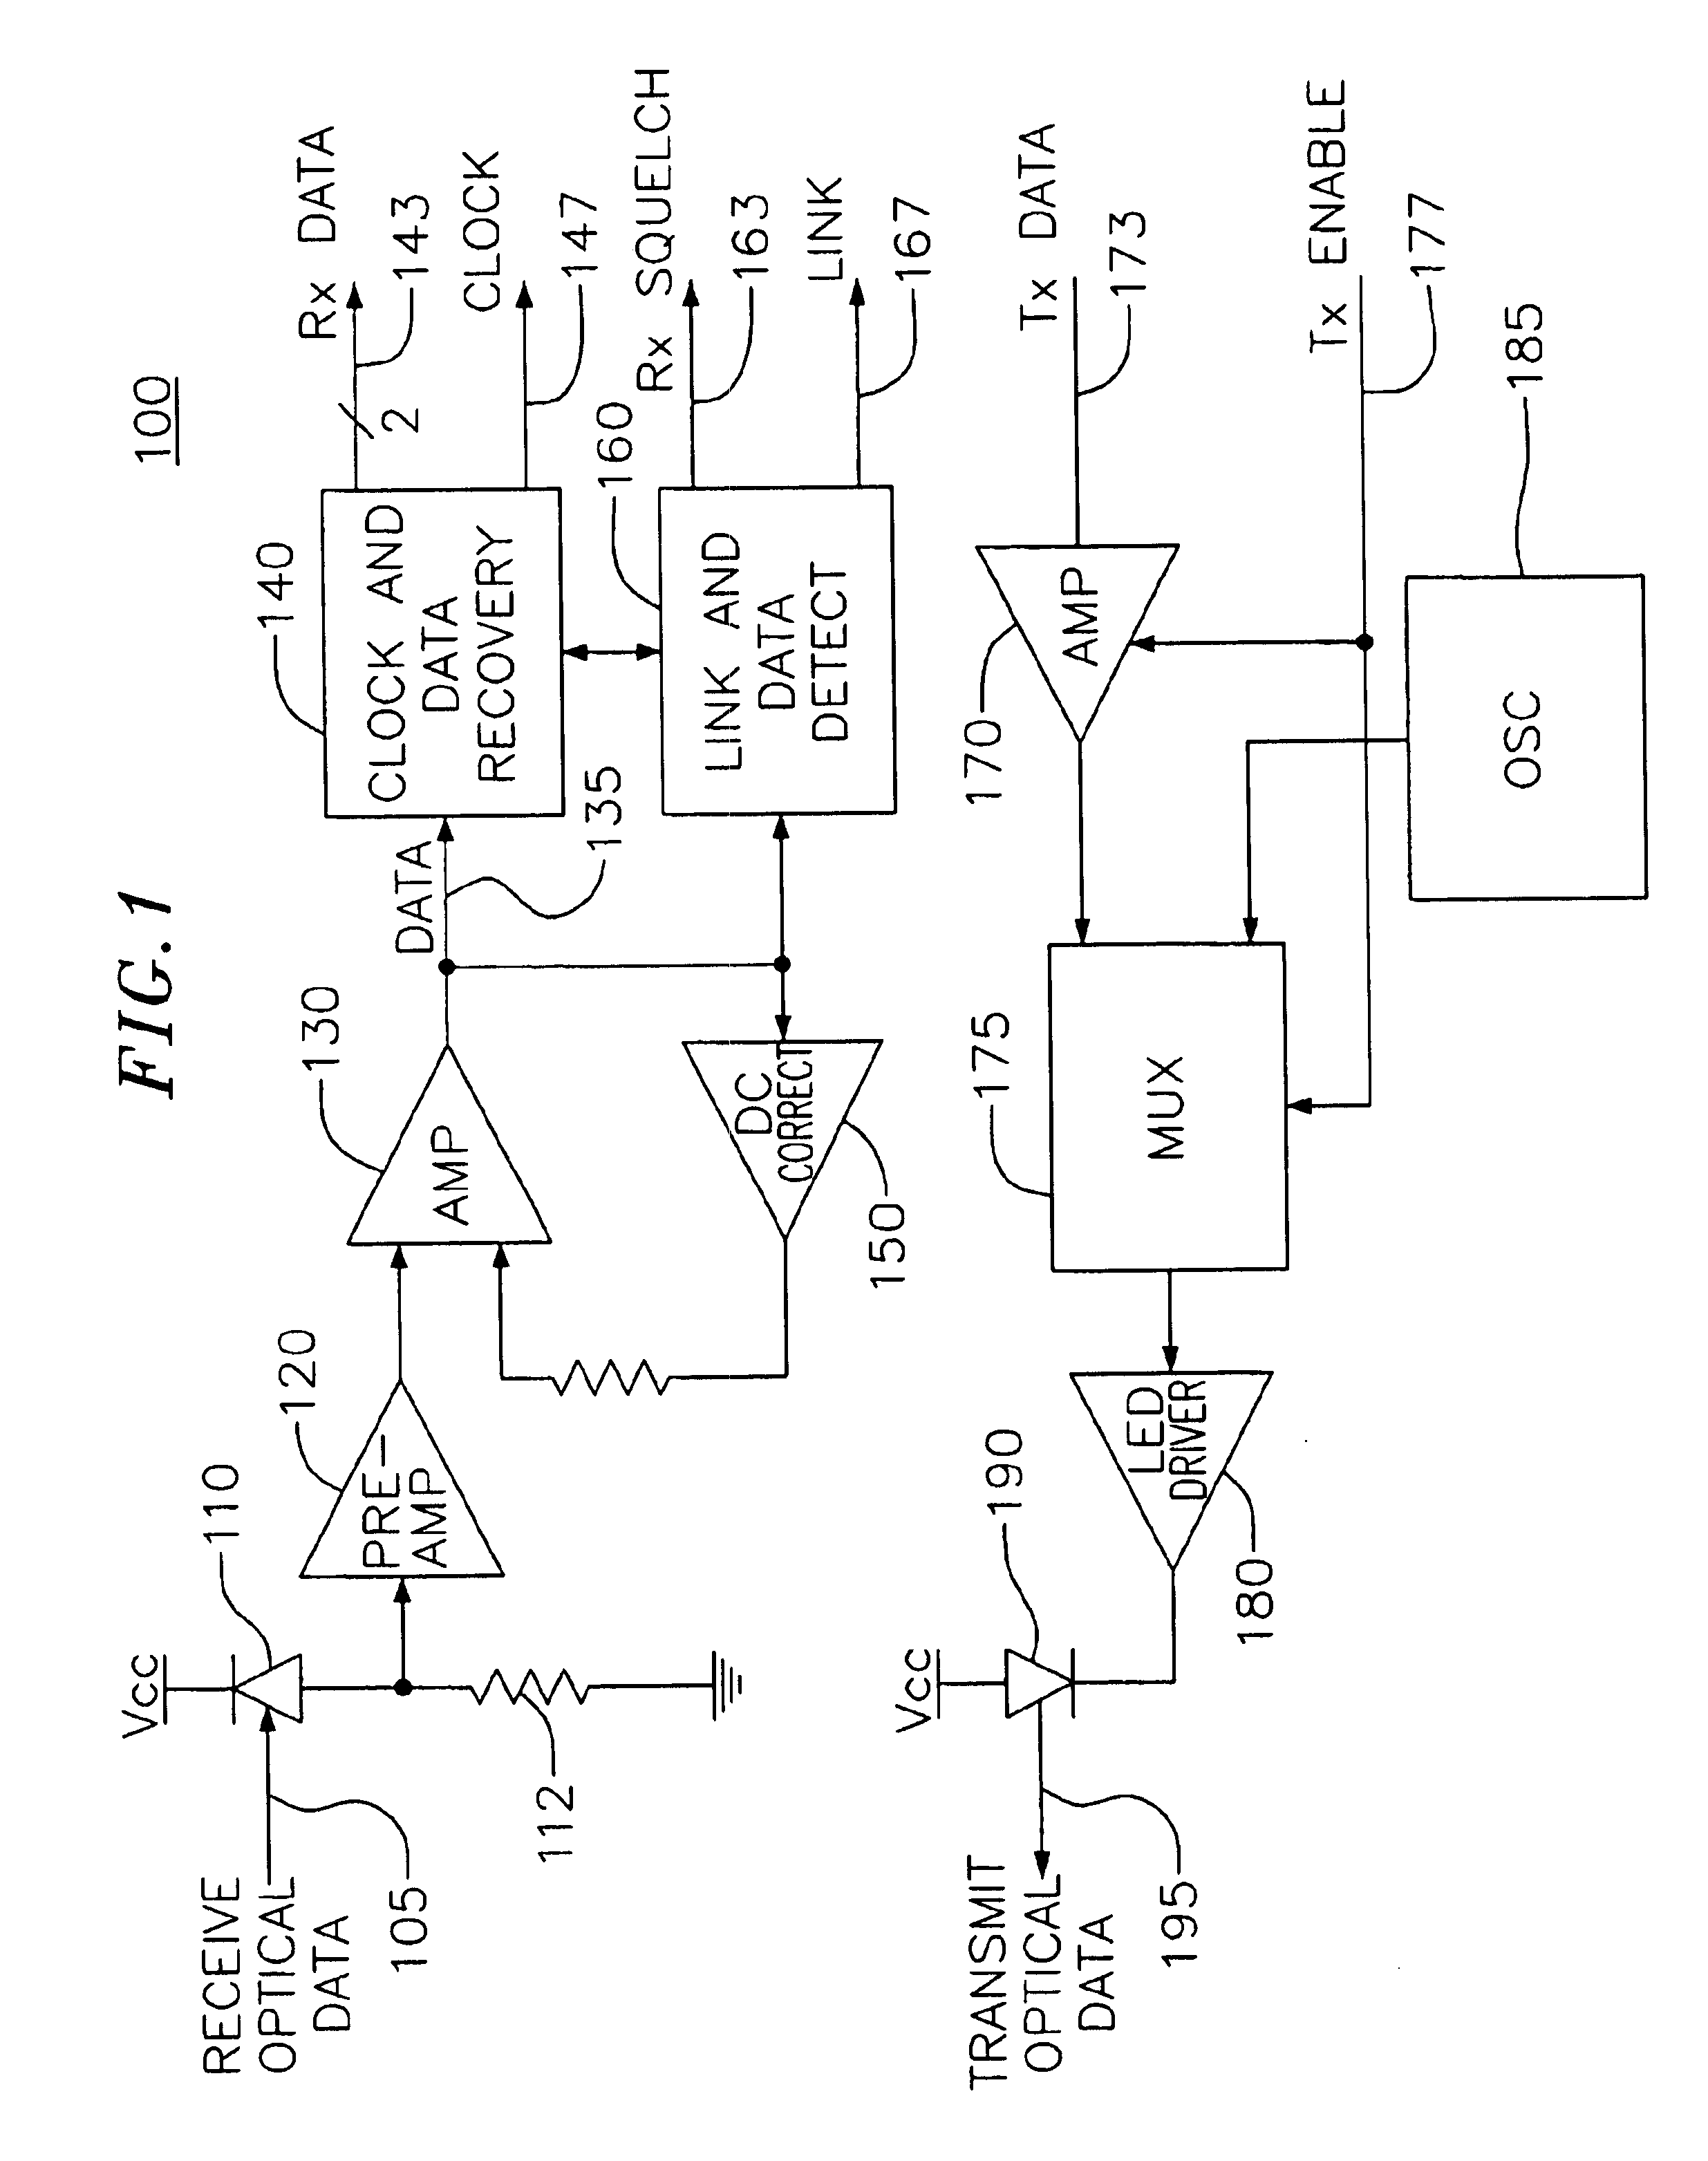 Linear half-rate phase detector and clock and data recovery circuit